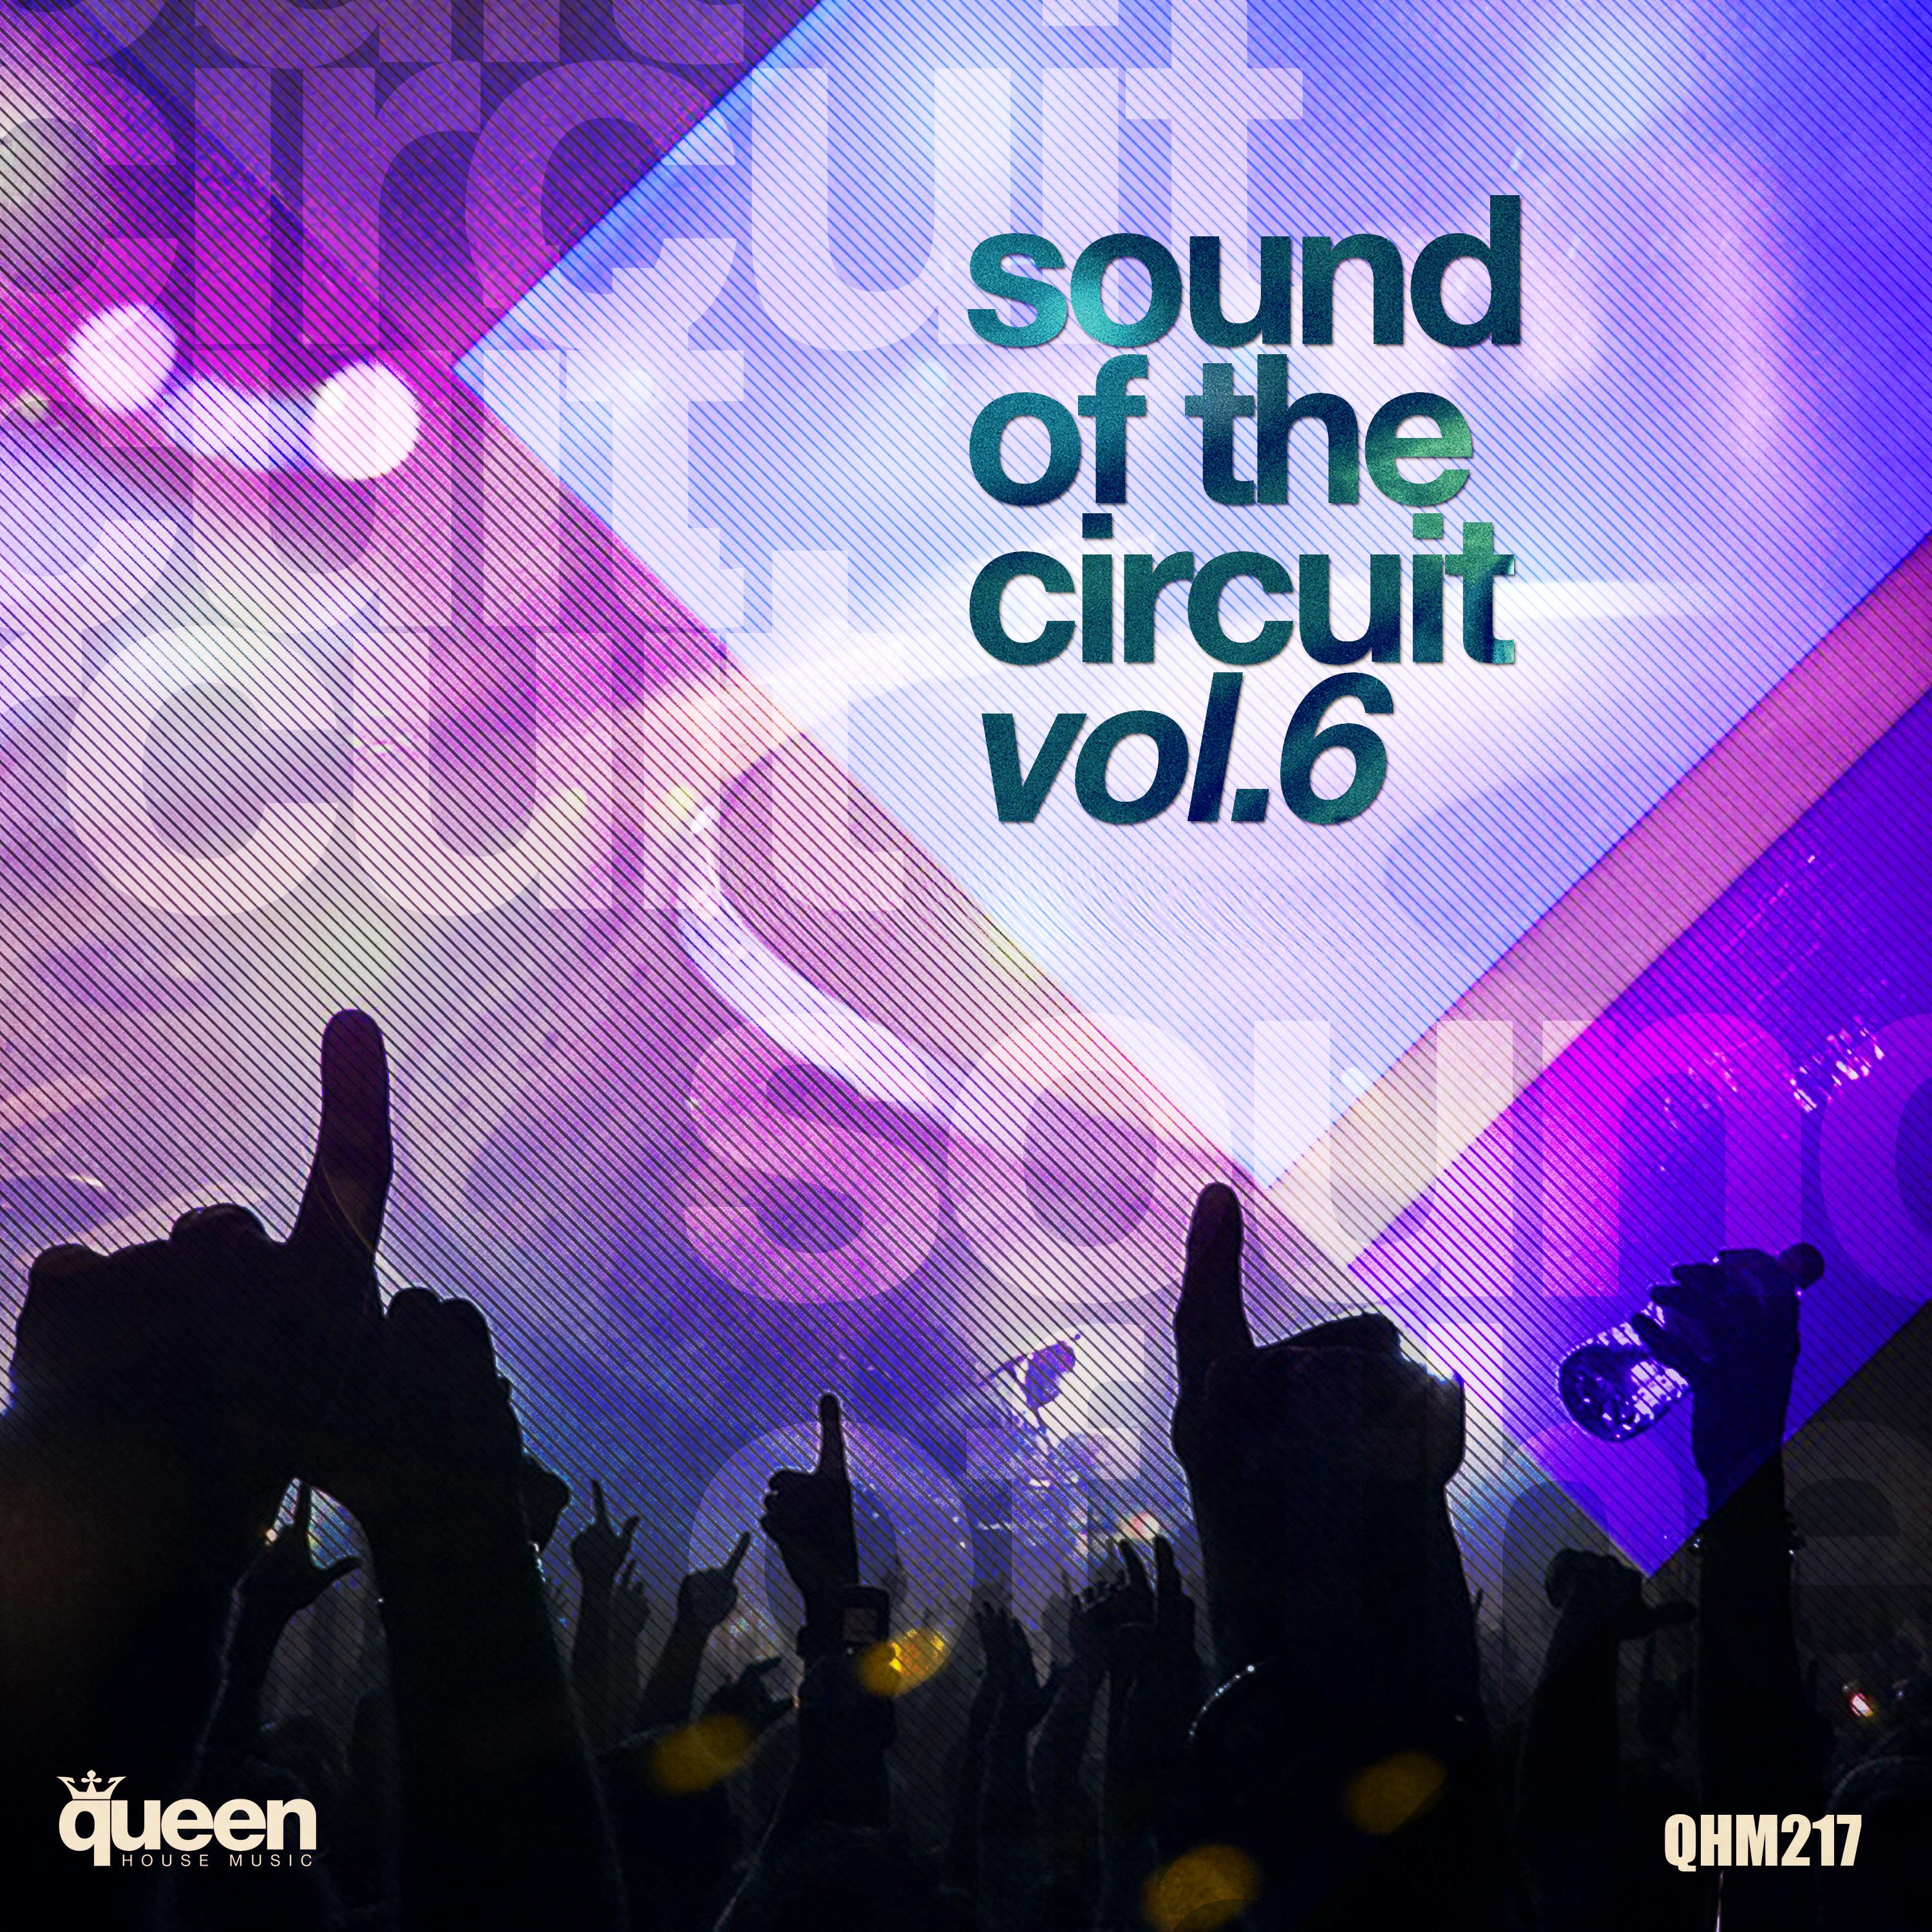 Sound of the Circuit, Vol. 6